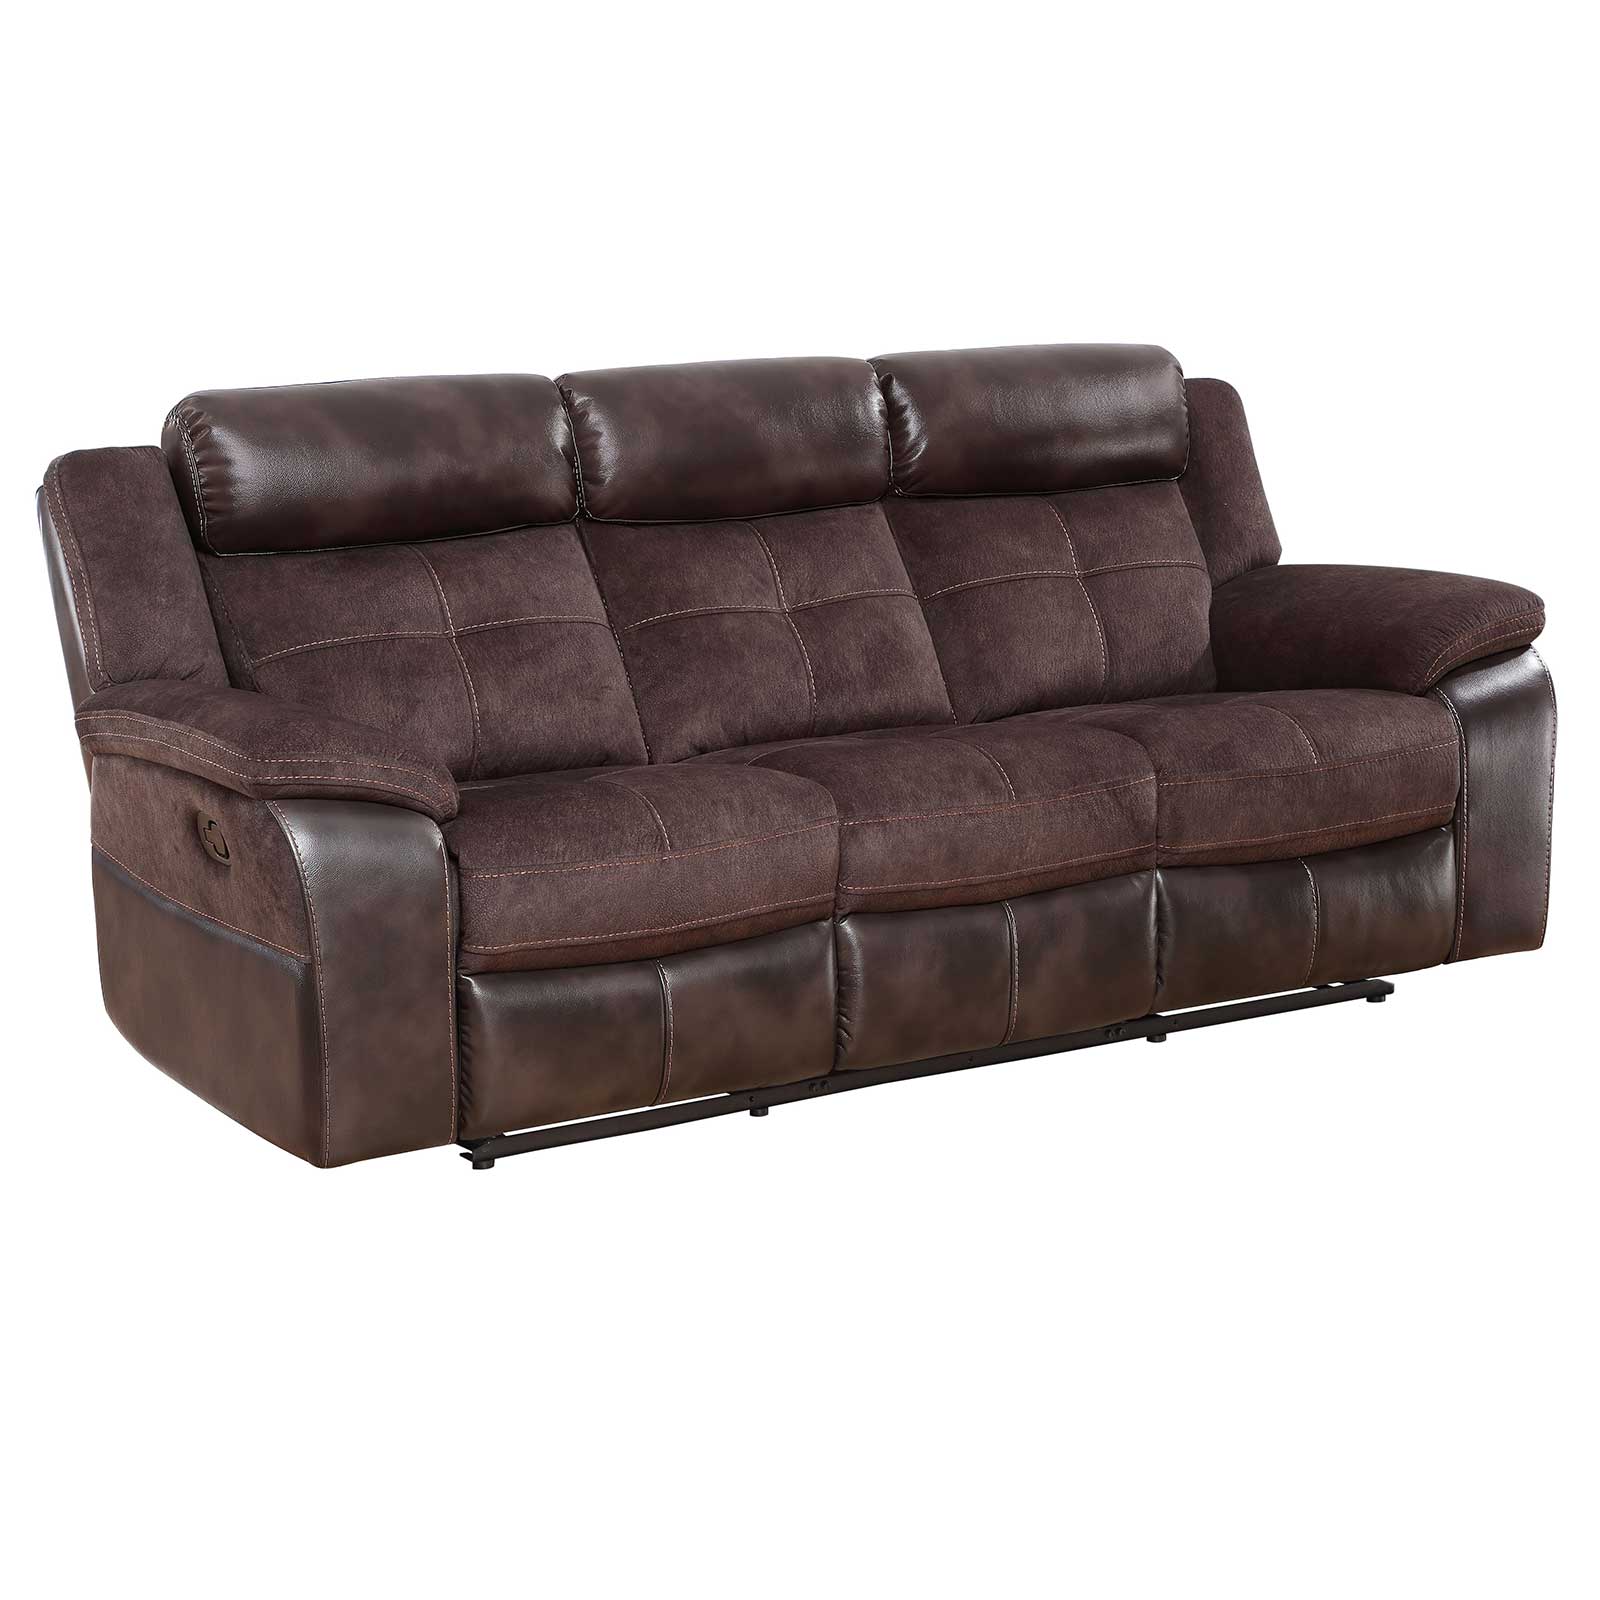 Steve Silver Co. Pueblo Two-Toned Reclining Sofa